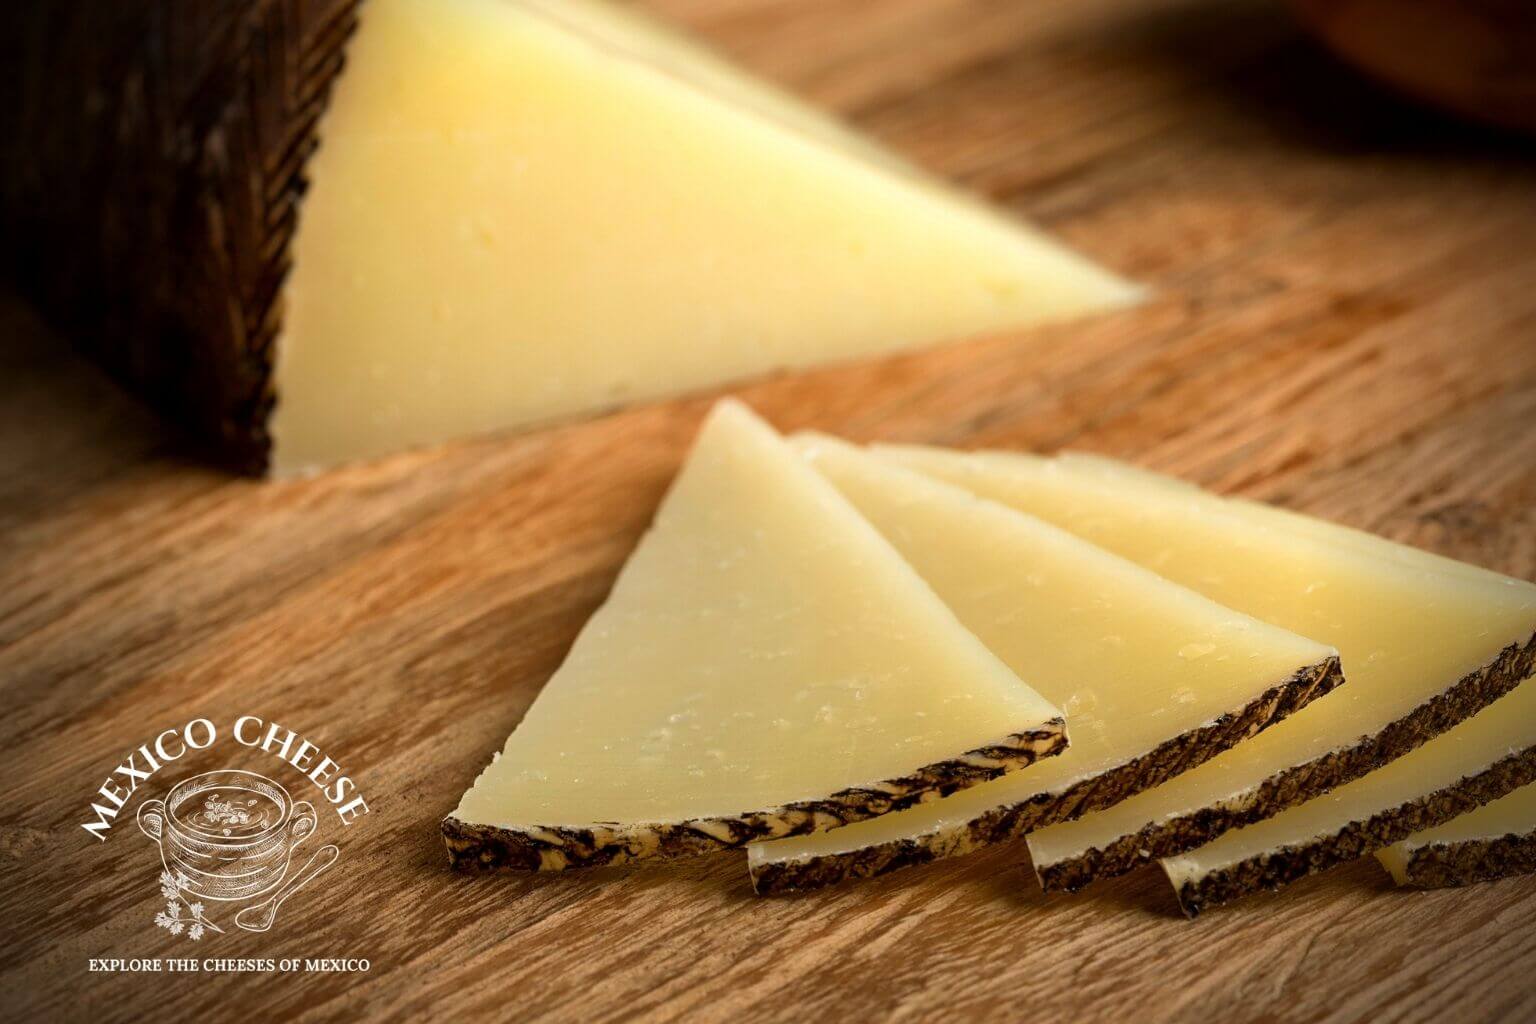 Manchego cheese sliced